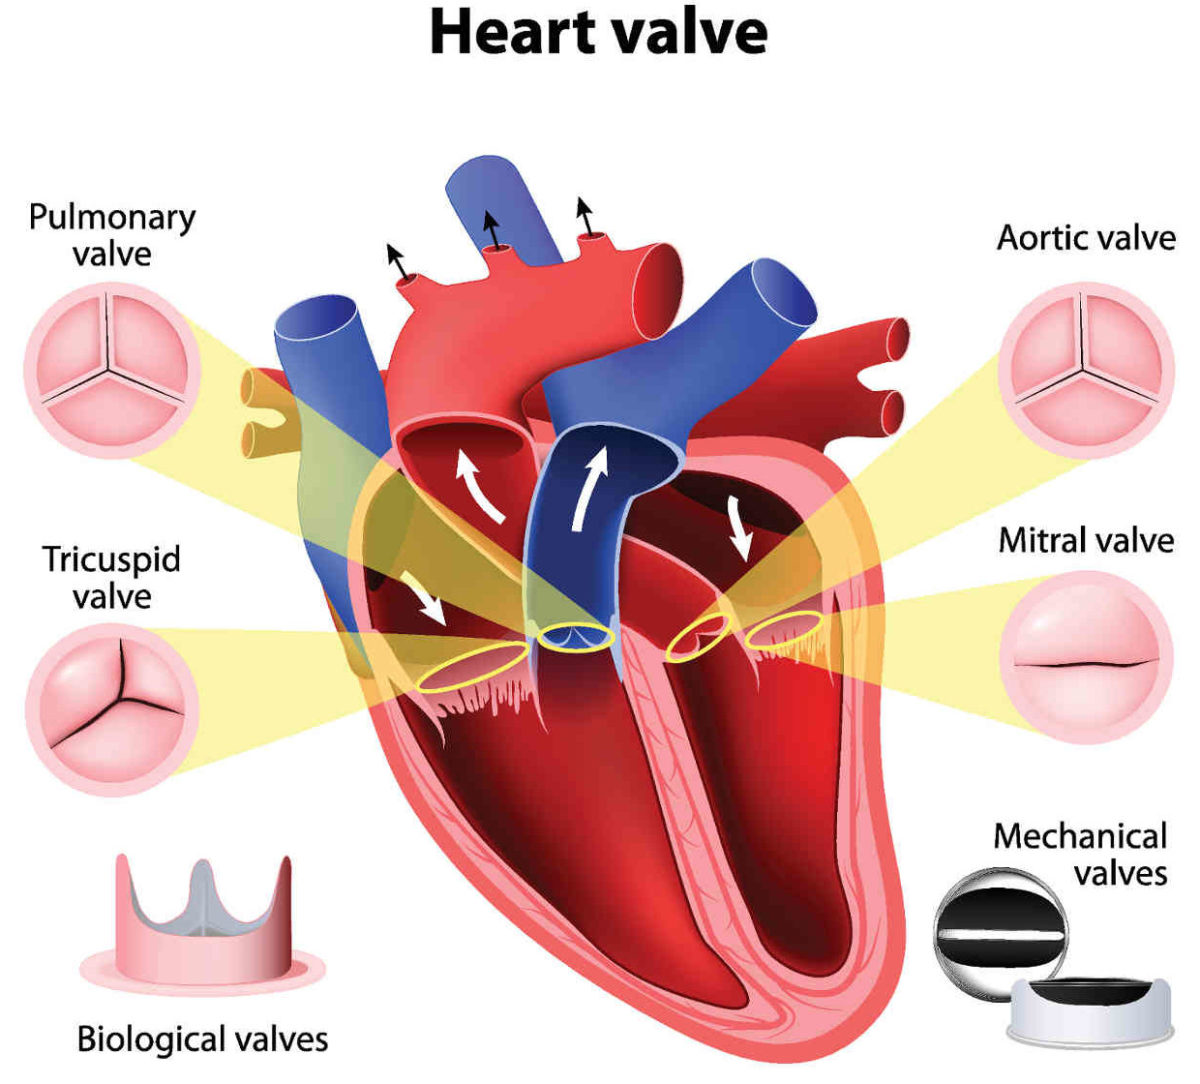 recovery after aortic valve surgery